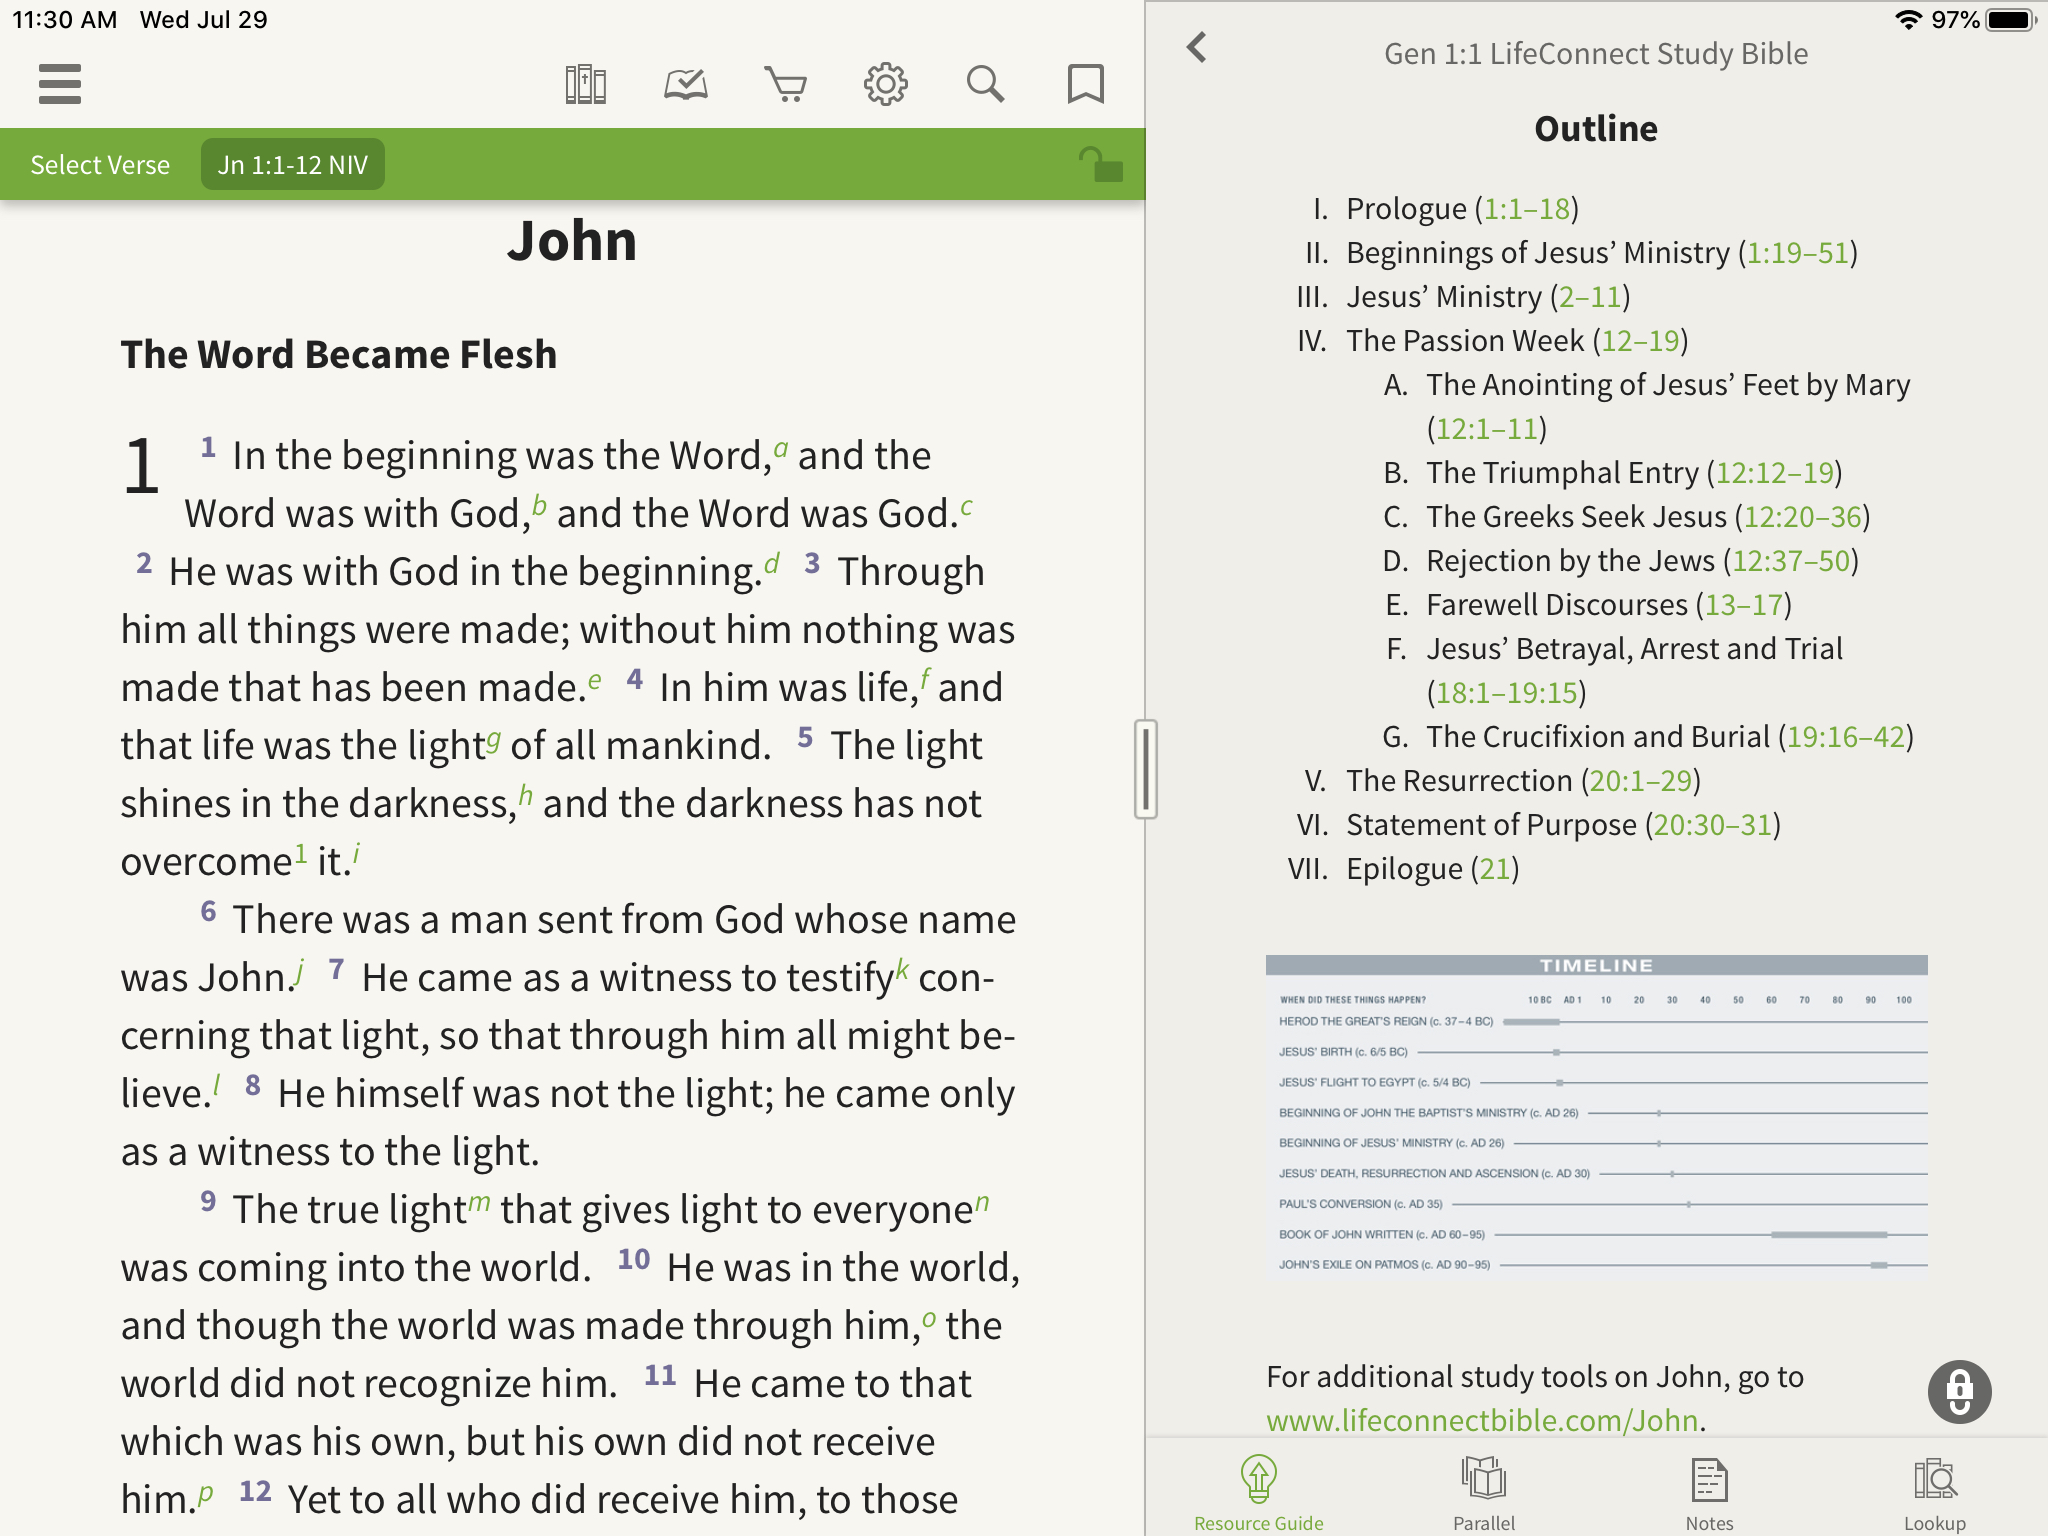 outlines in the olive tree bible app